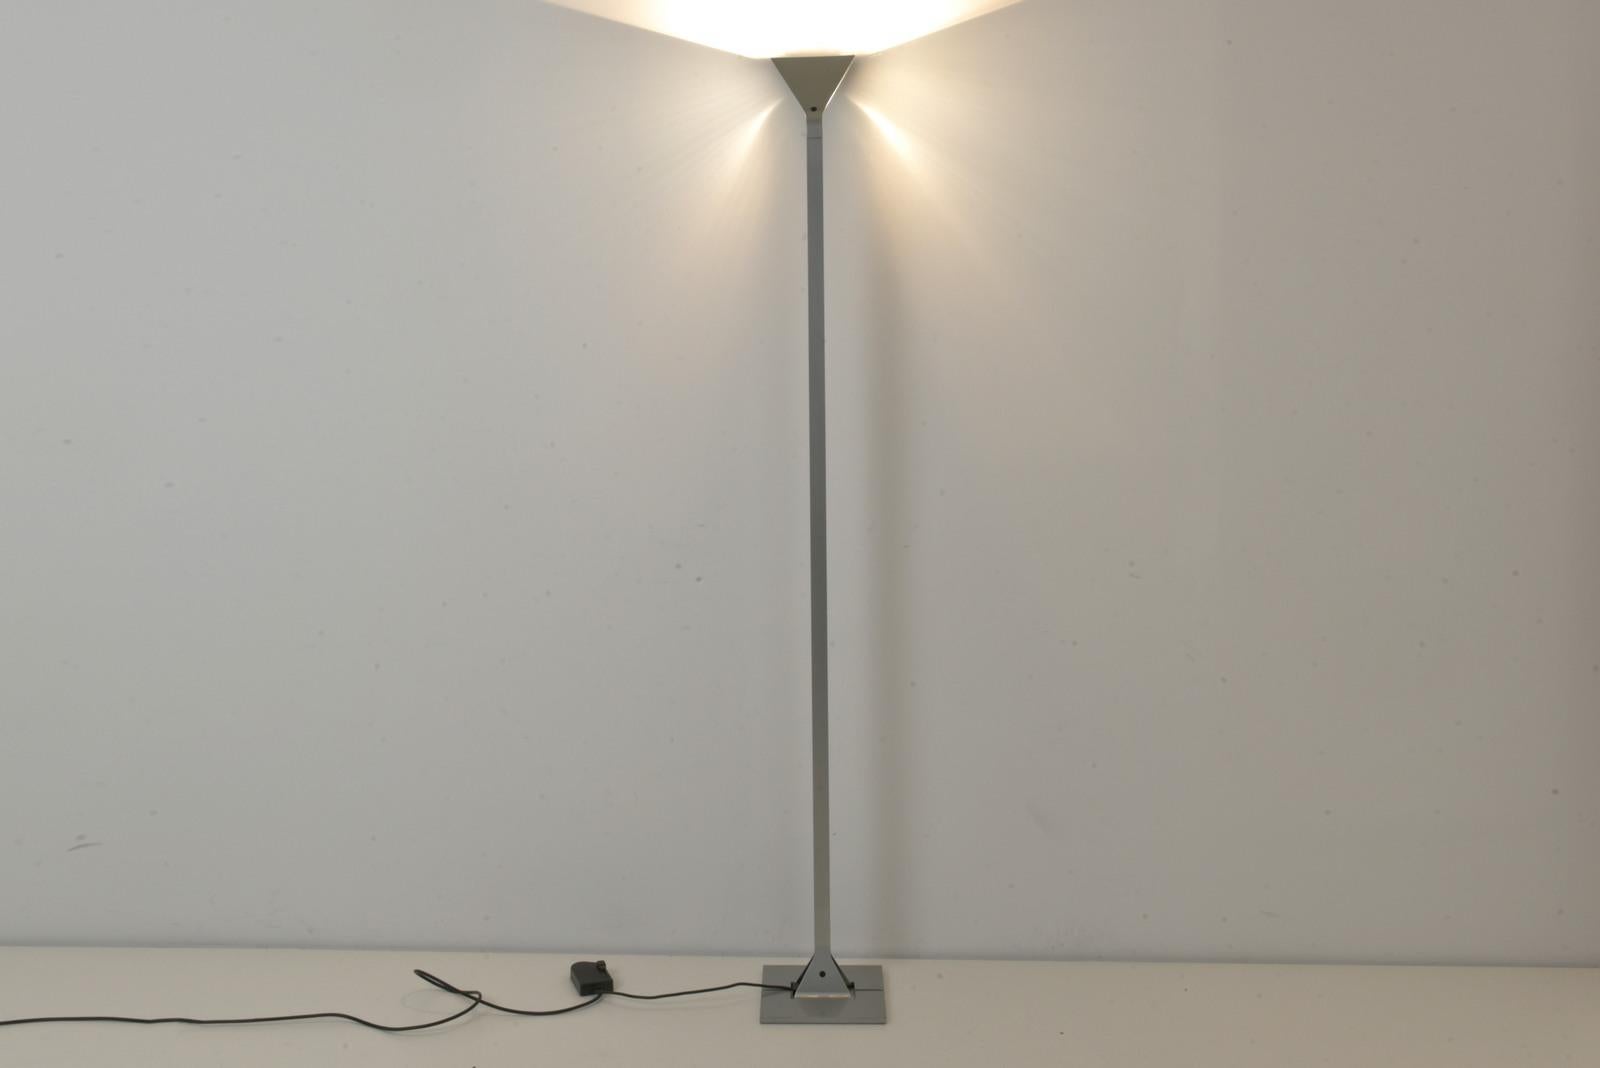 Cast PAPILLONA Floor Lamp by Tobia Scarpa for Flos, Italy - 1975 For Sale